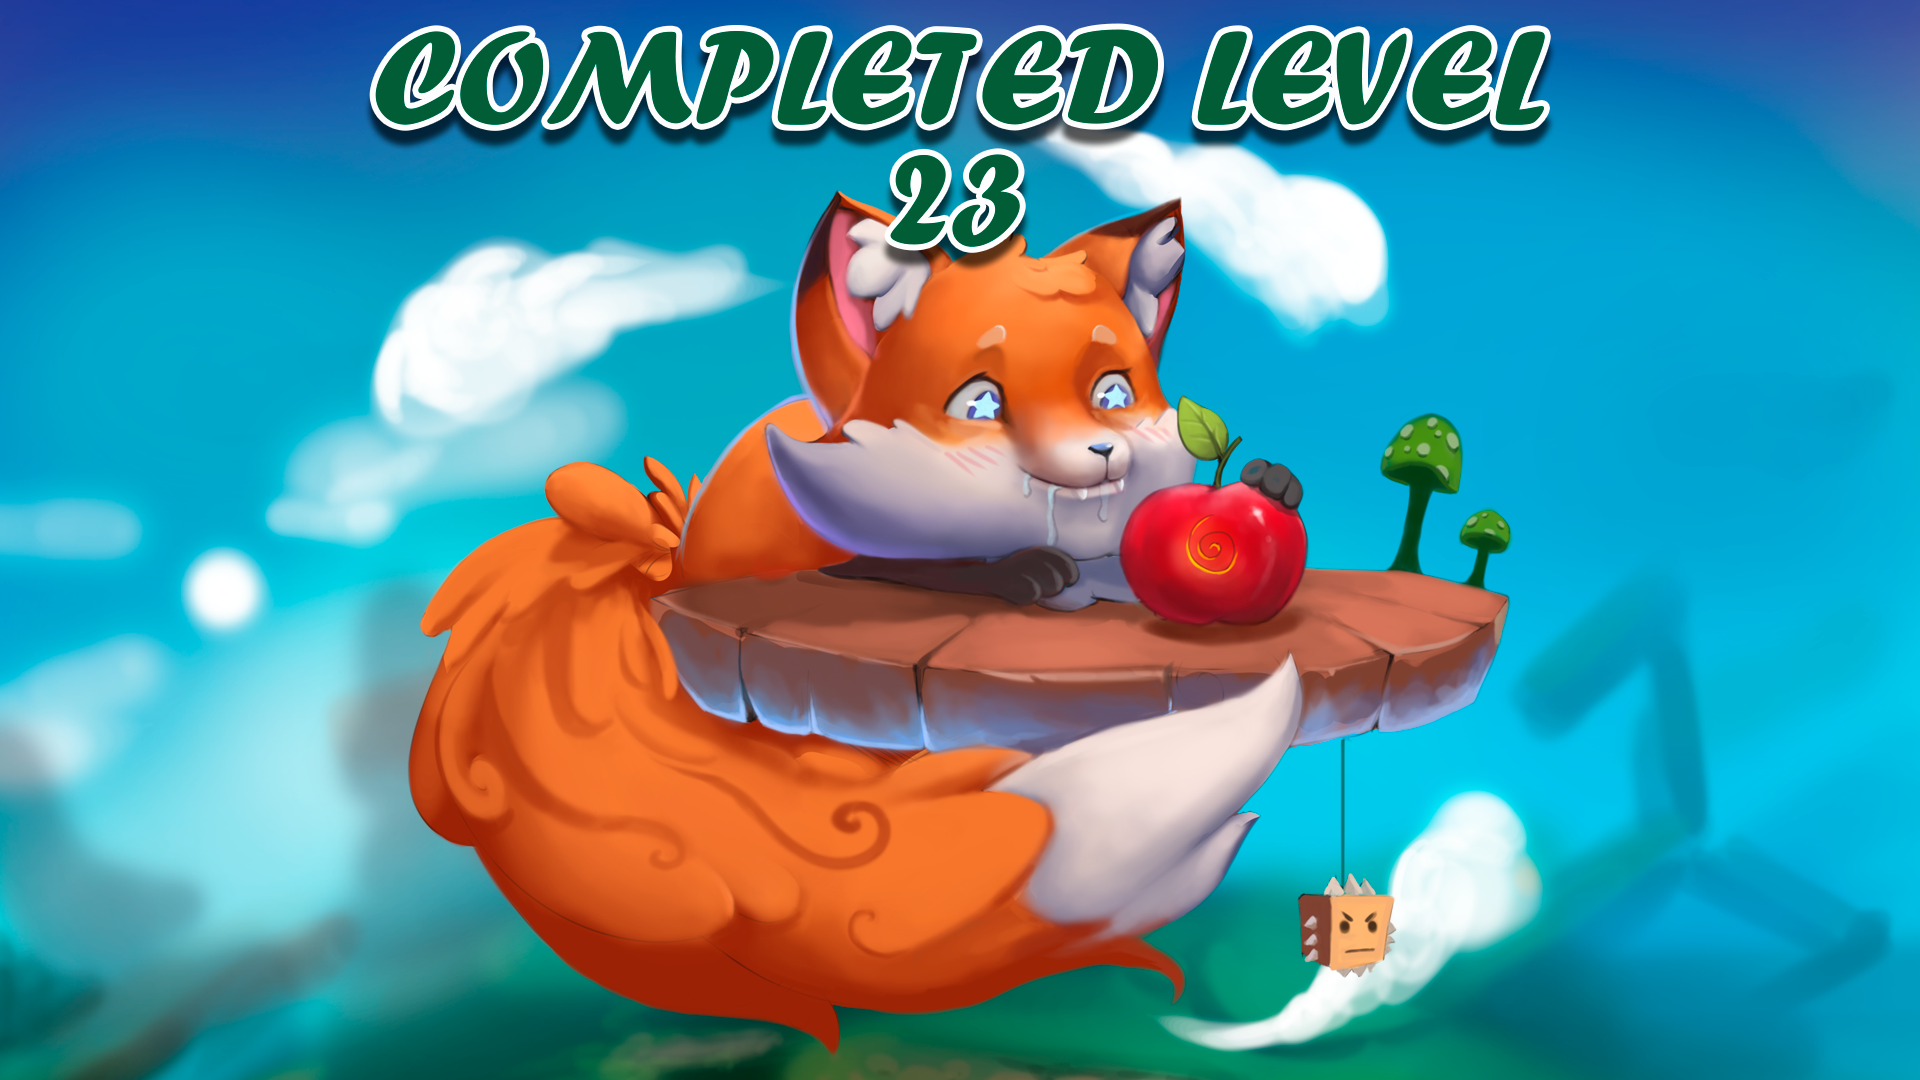 23 levels completed